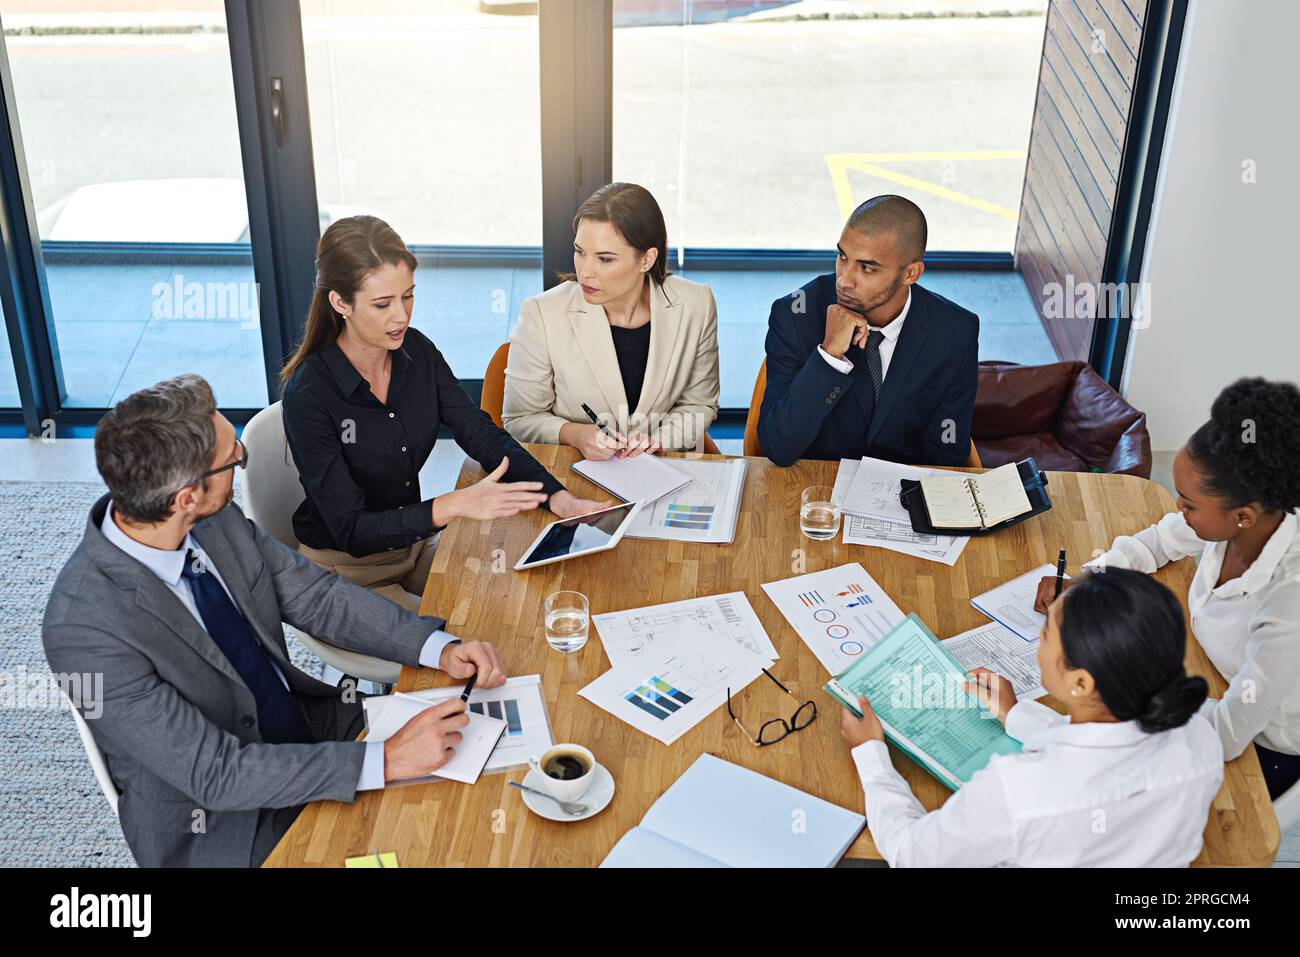 Where ideas become actions. a group of businesspeople meeting in the boardroom. Stock Photo